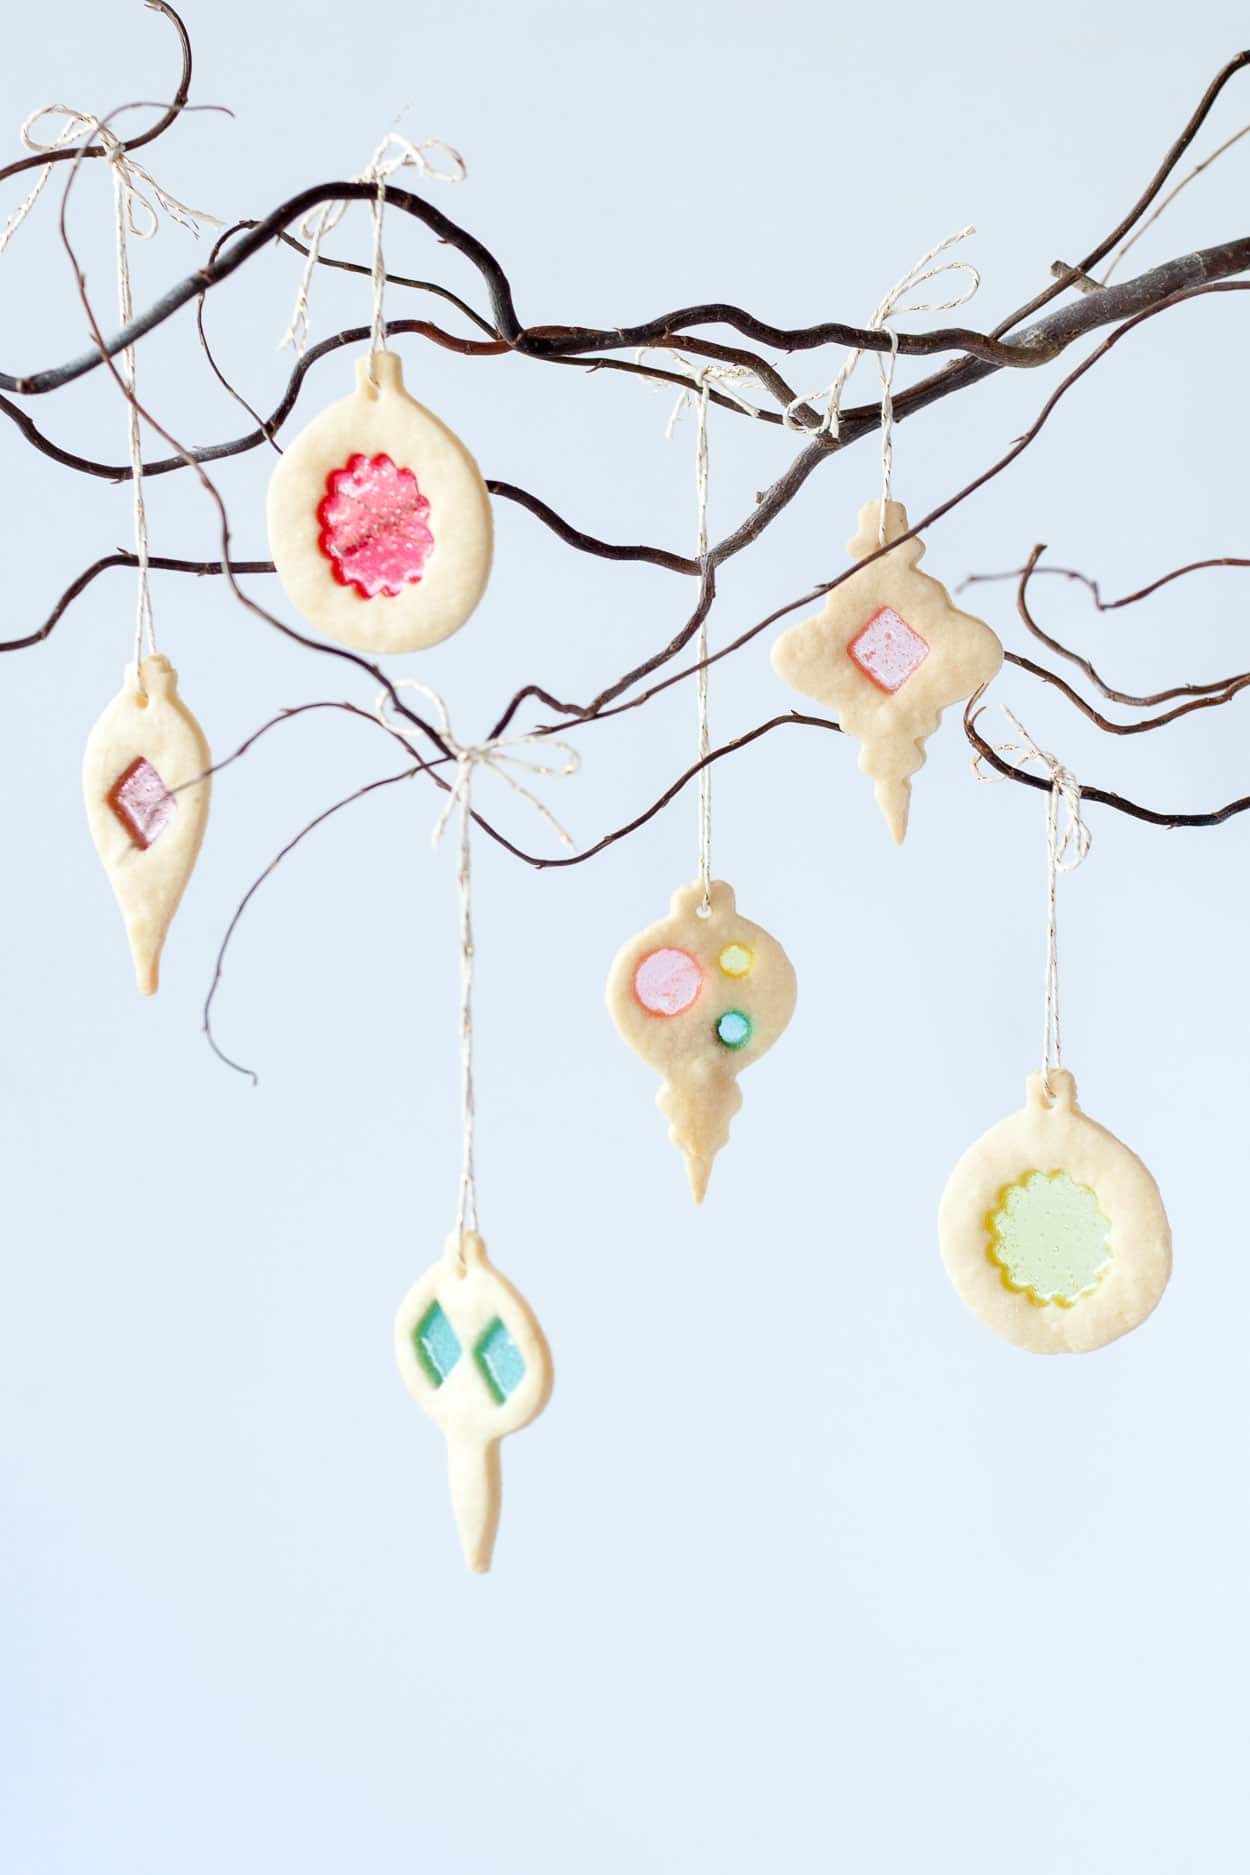 Stained glass cookies hanging from a branch.